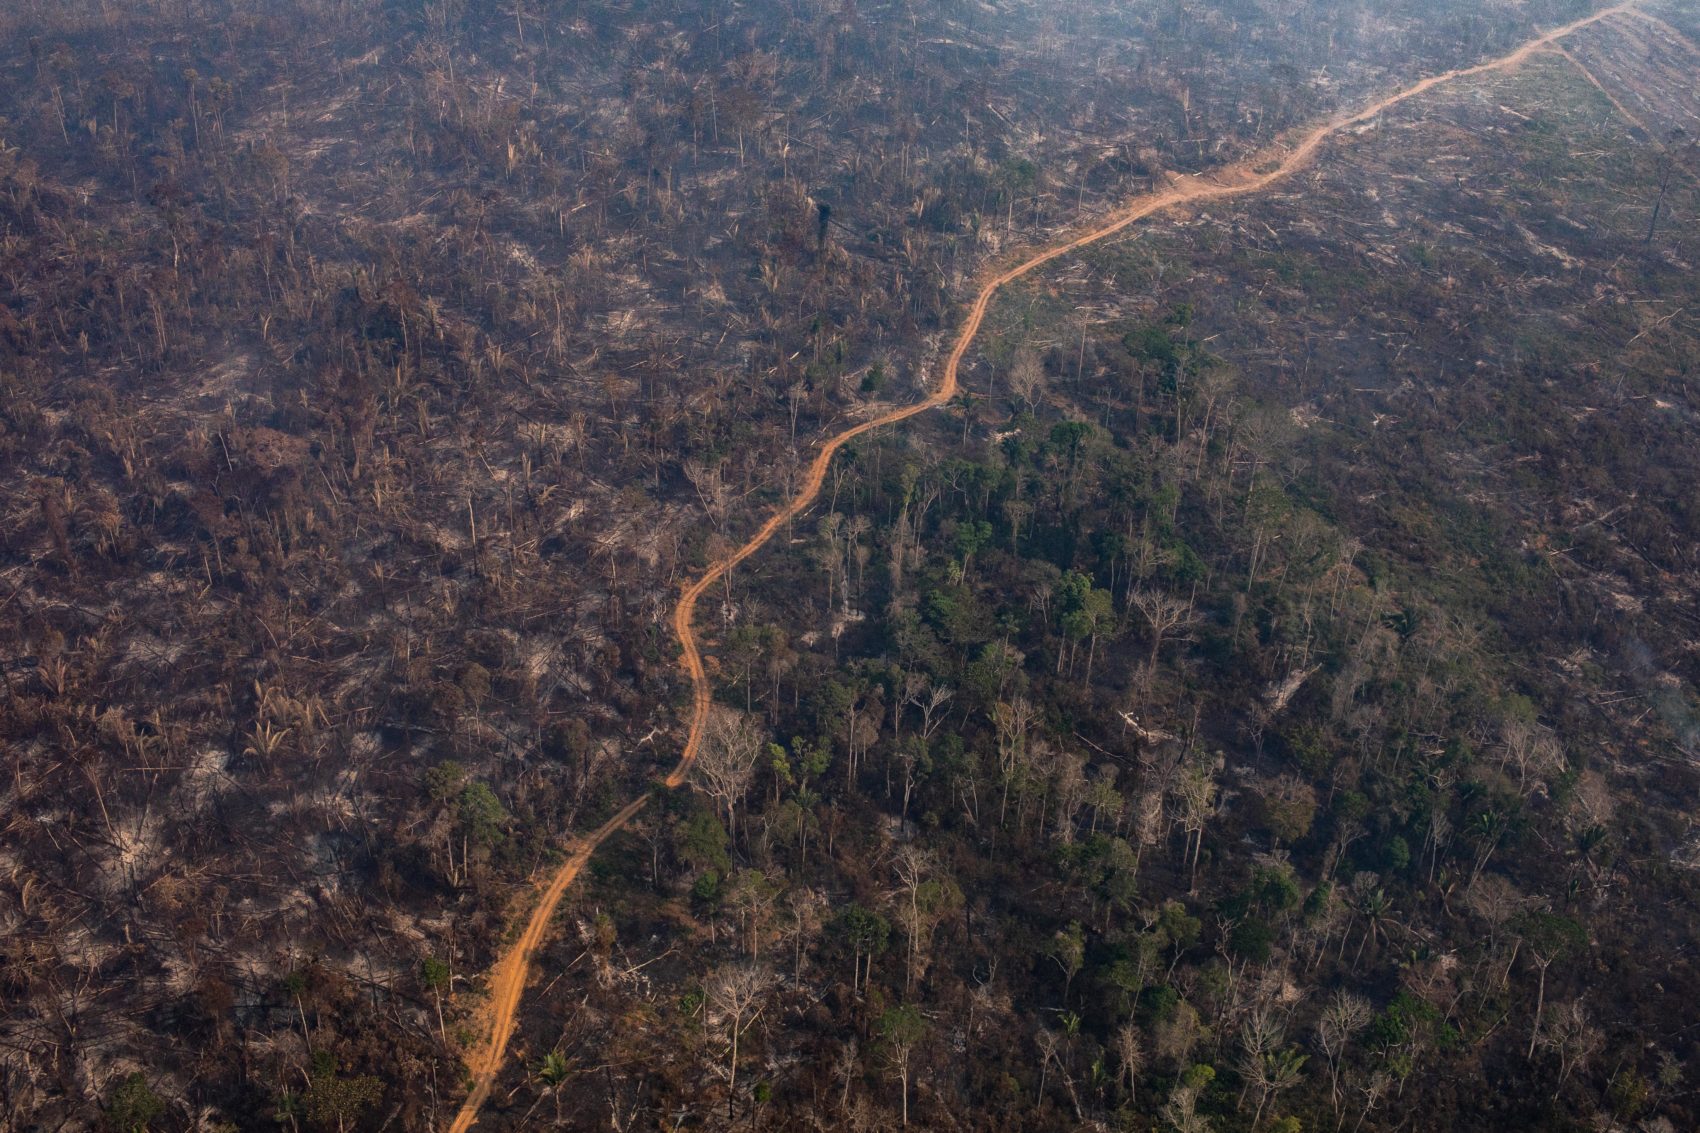 how many trees are cut down each year in the amazon rainforest